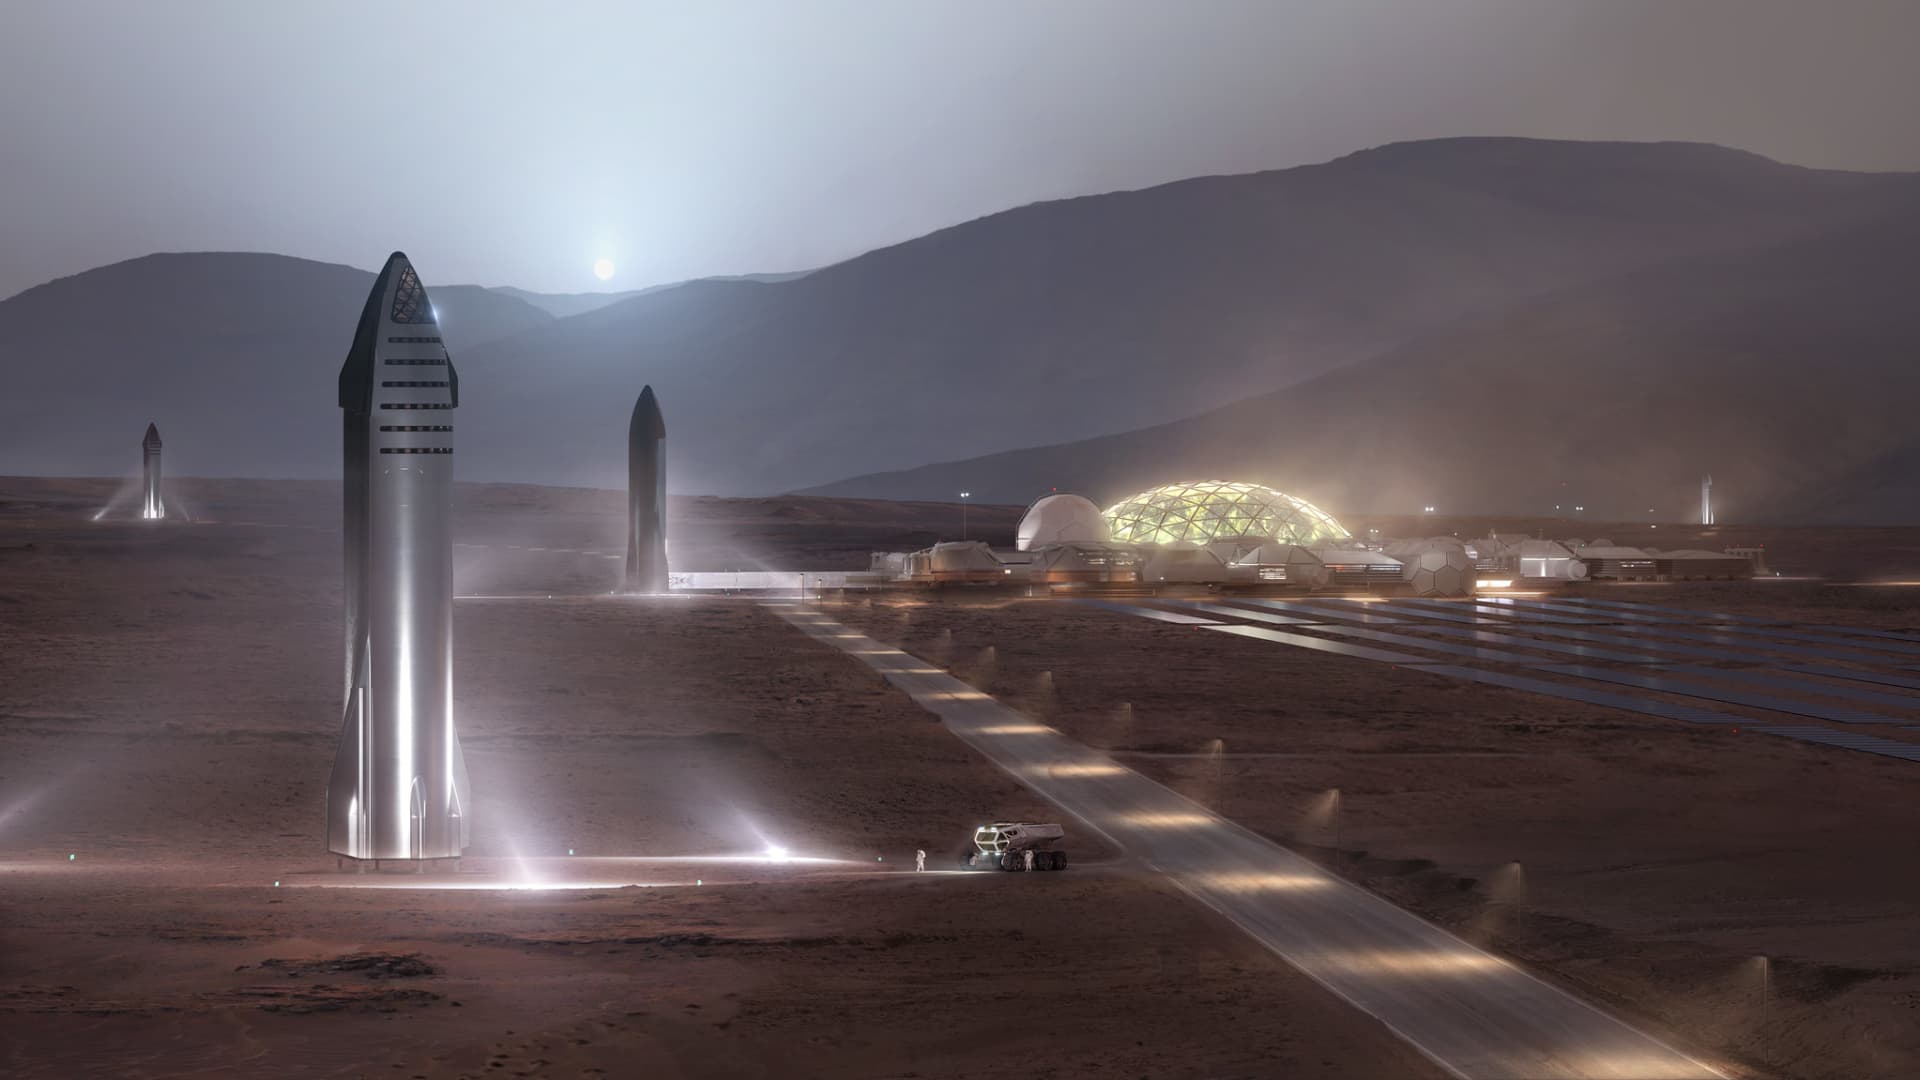 An artist rendering of SpaceX's Starship rockets on the surface of Mars.